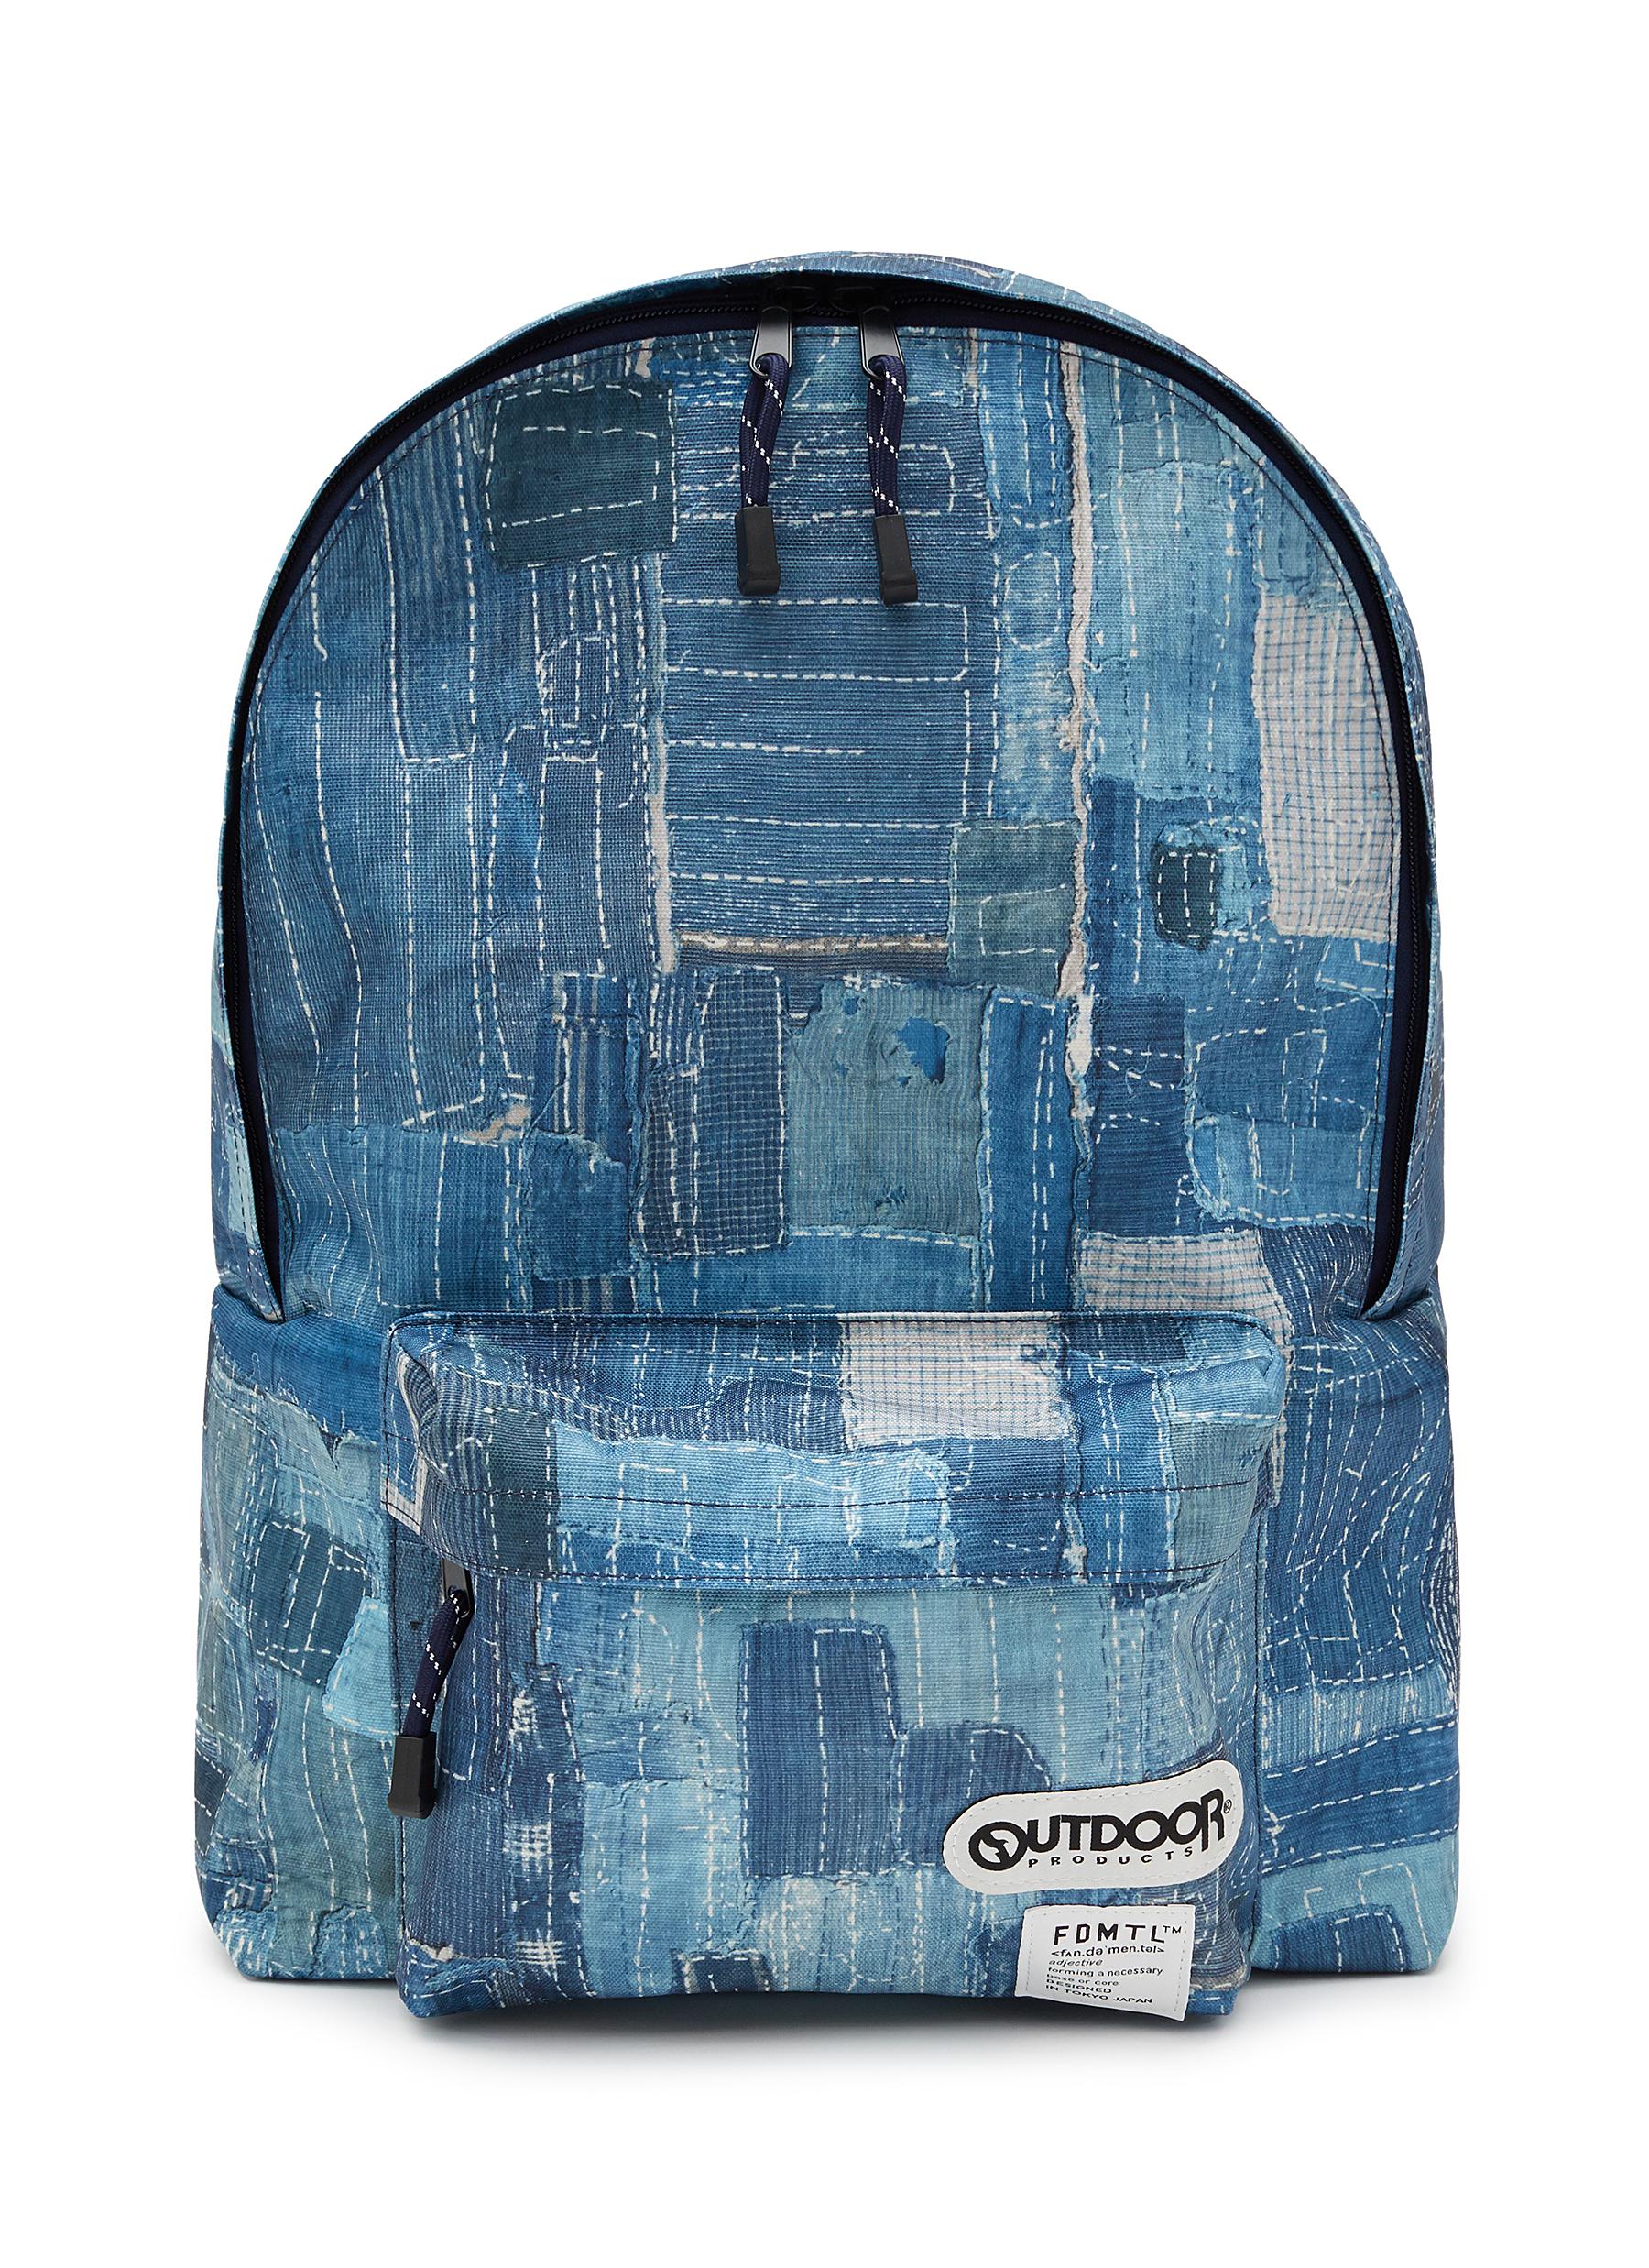 FDMTL x OUTDOOR PRODUCTS Boro Patchwork Print Backpack